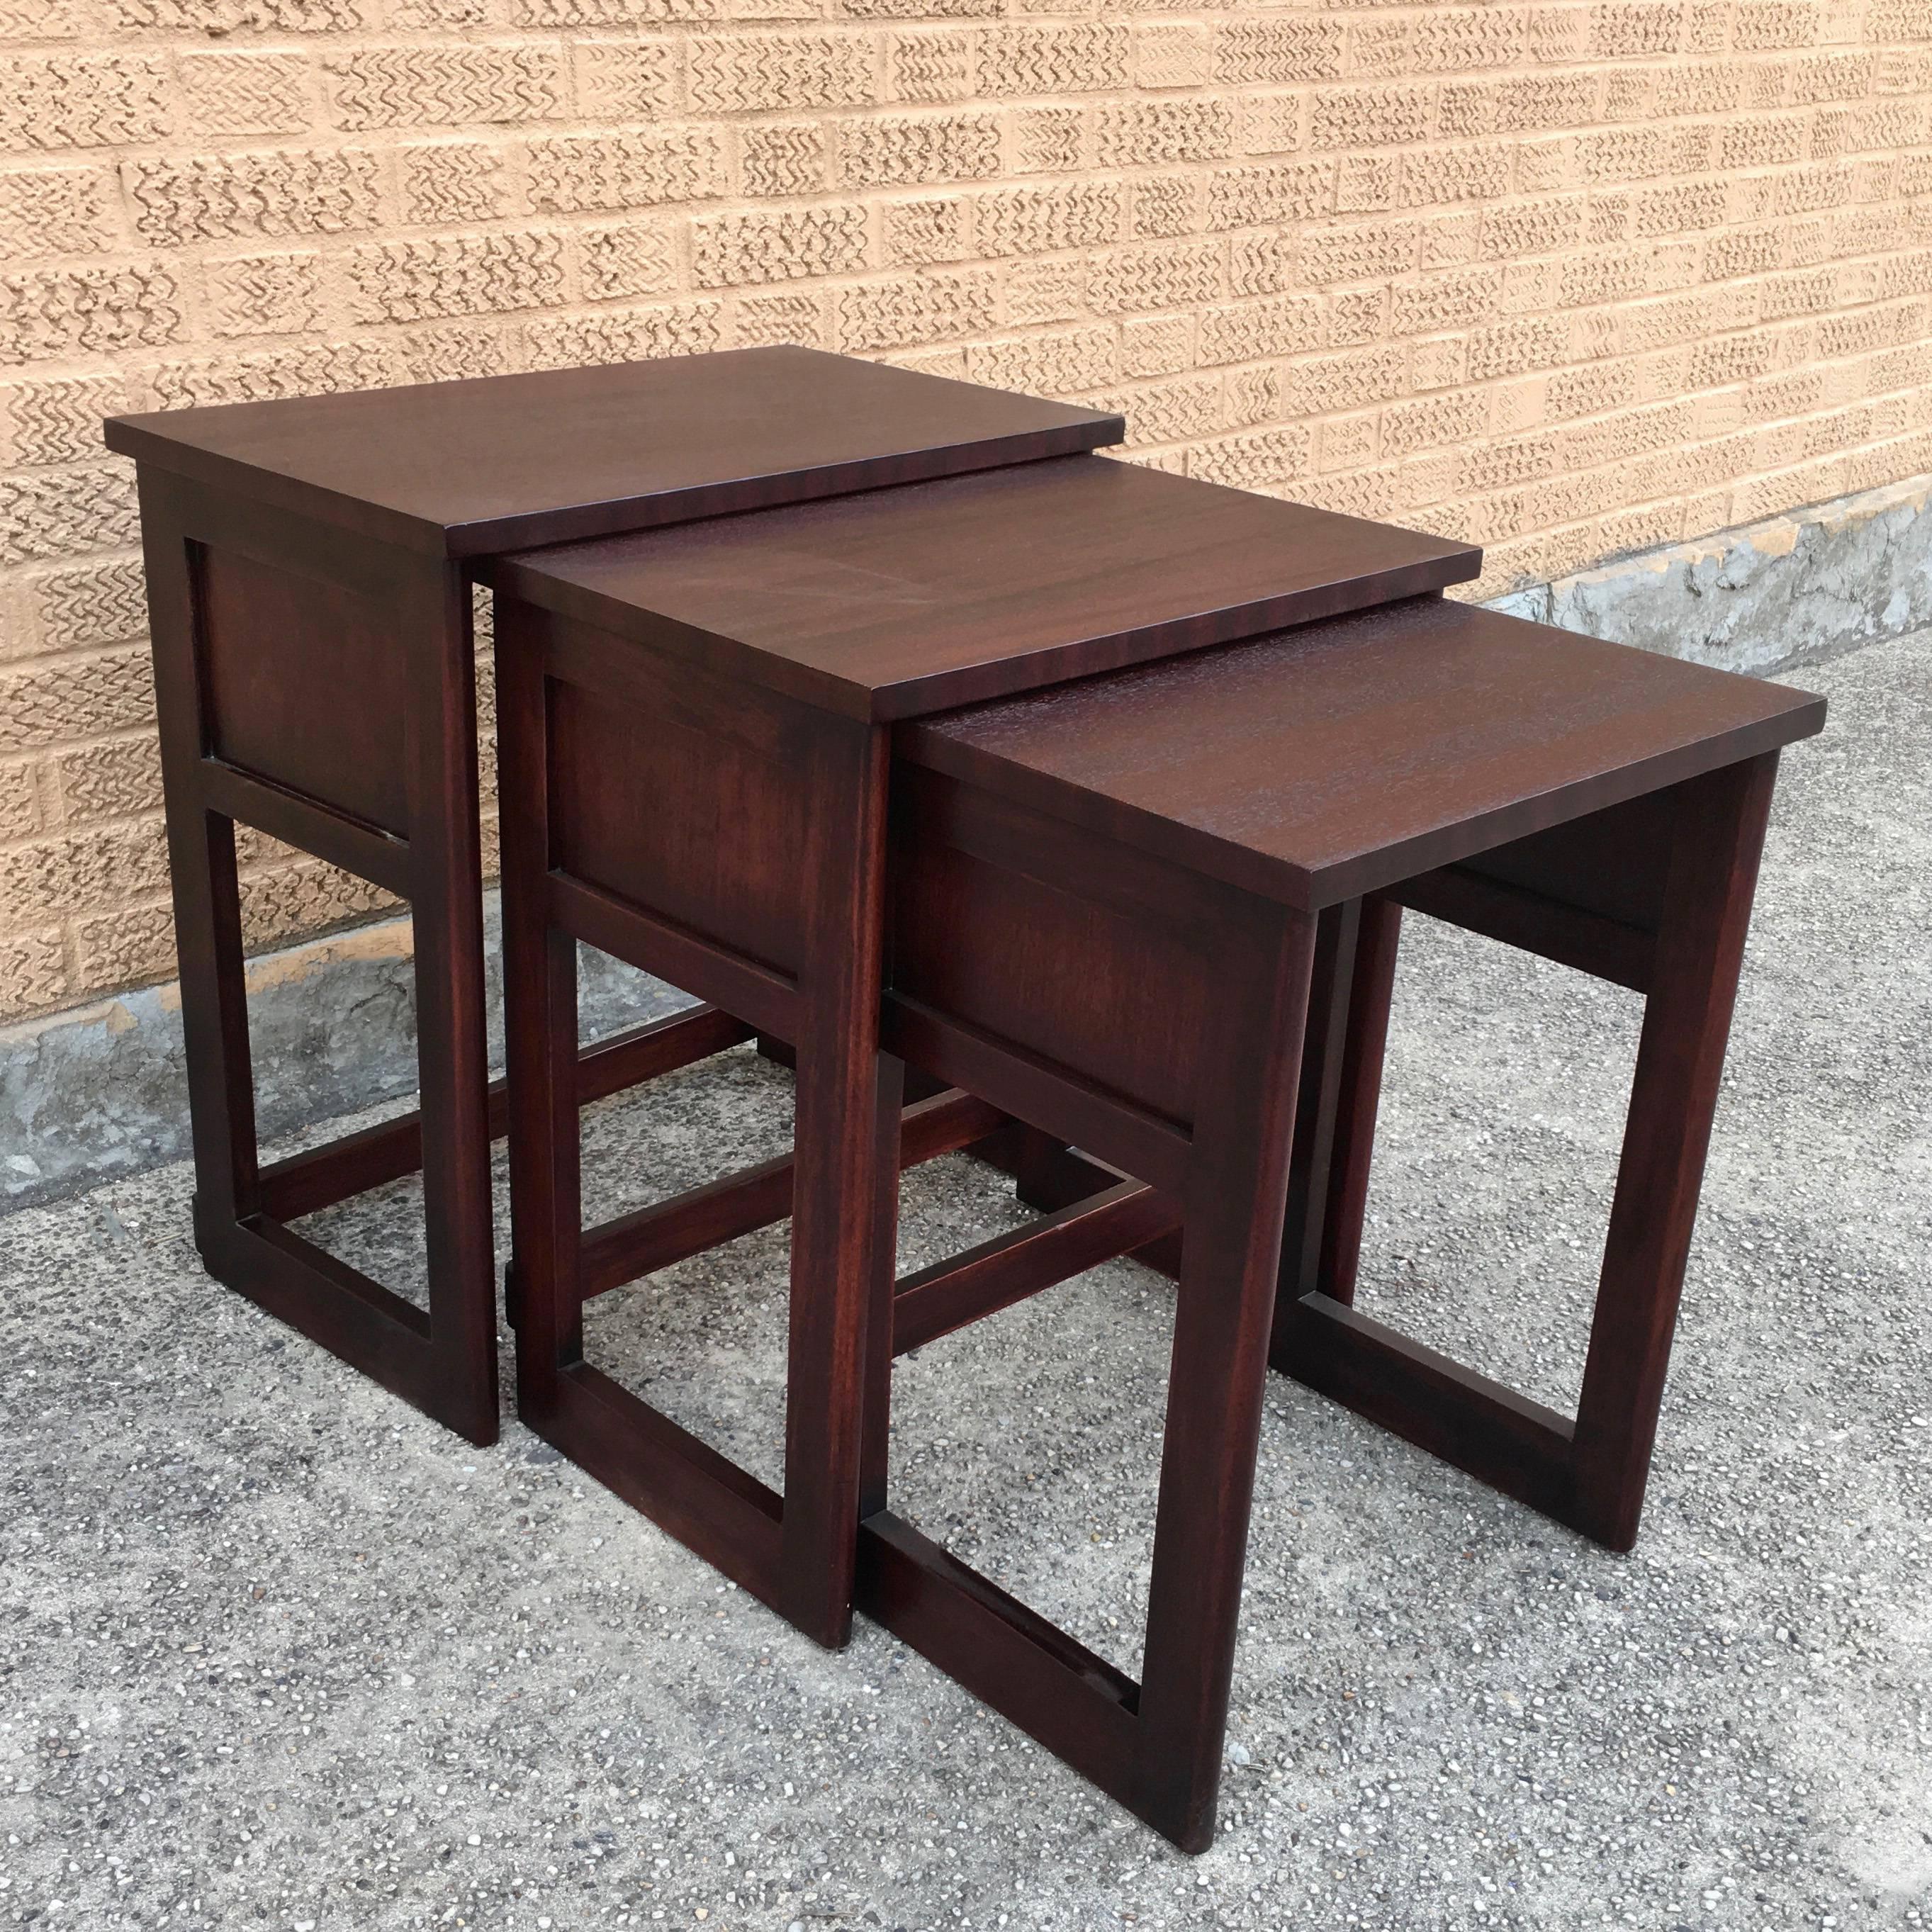 Set of three, Mid-Century Modern, mahogany, stacking tables in the style of Harvey Probber. Height of the middle table is 24